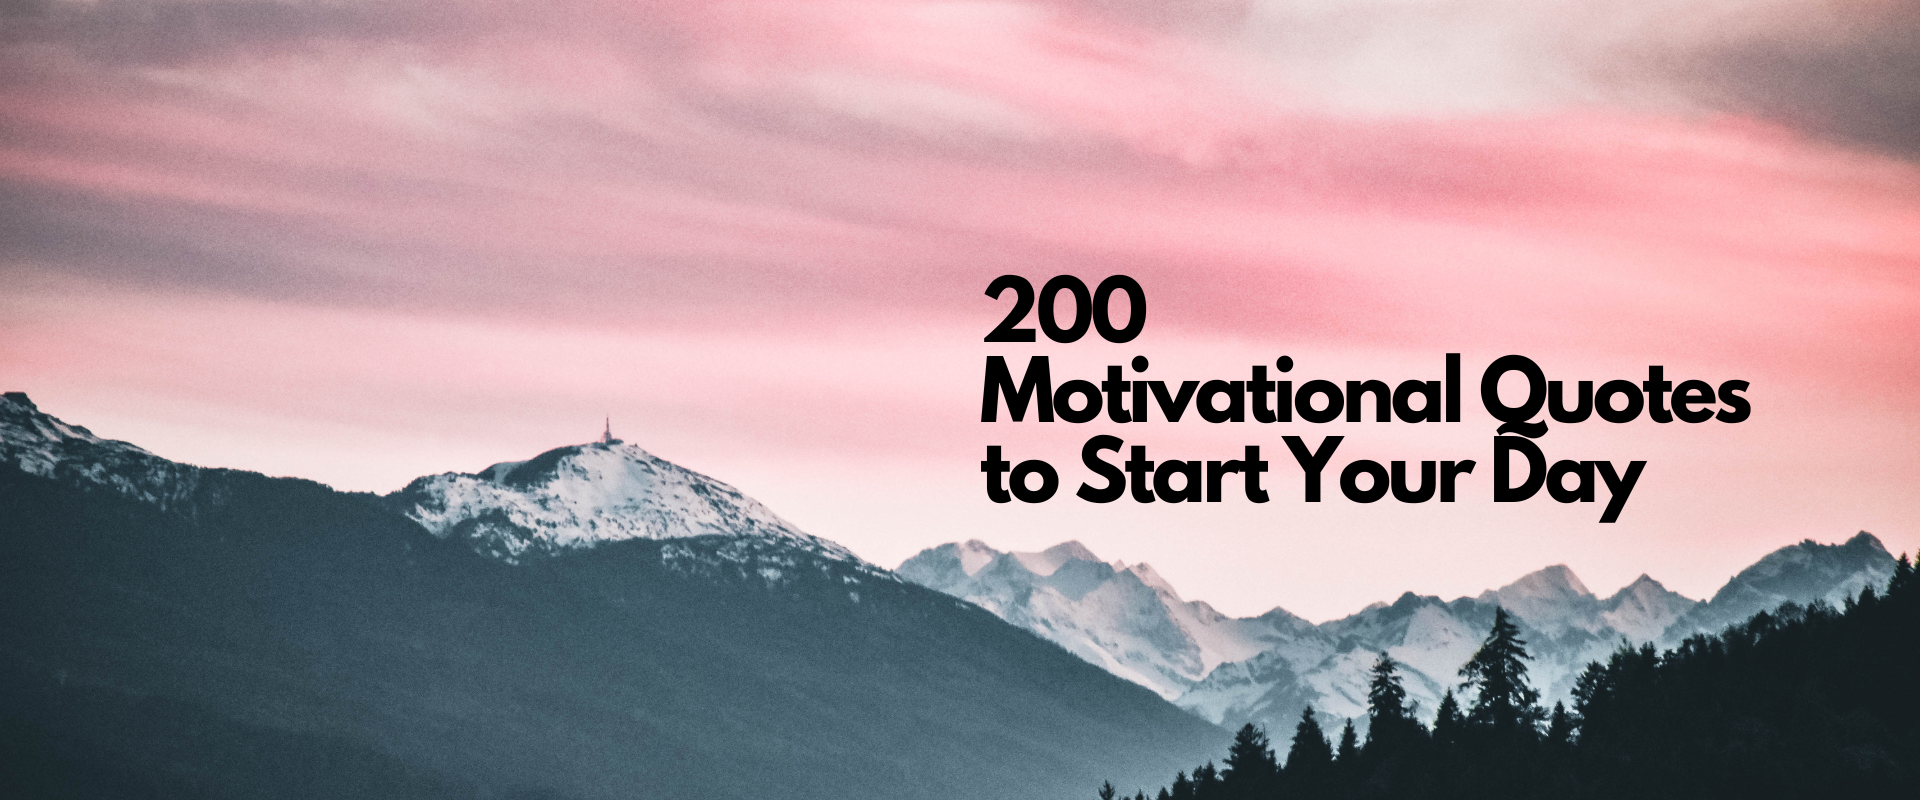 200 Motivational Quotes to Start Your Day